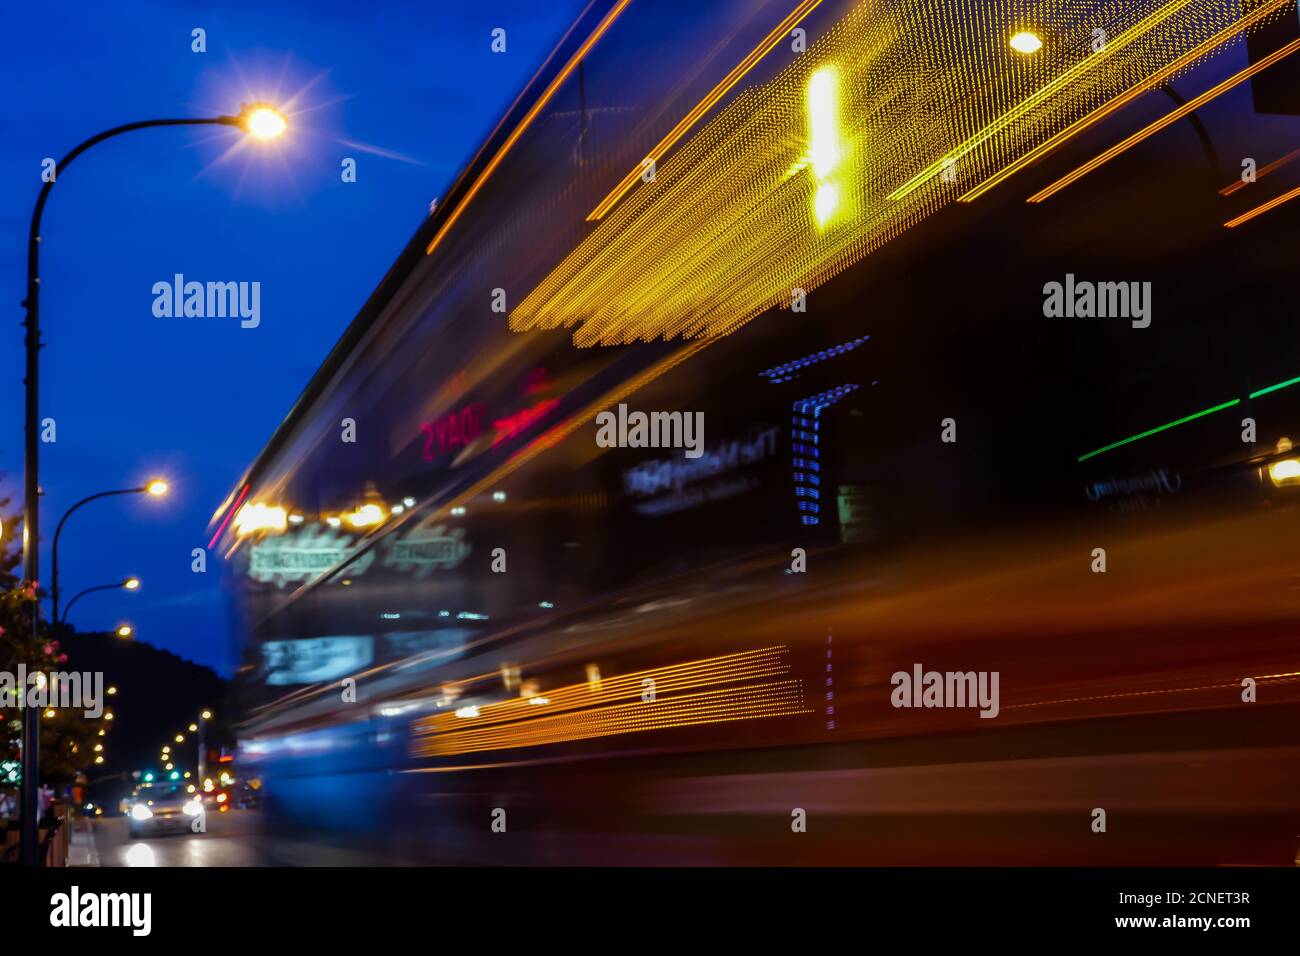 Bus motion with evenings street lights Stock Photo